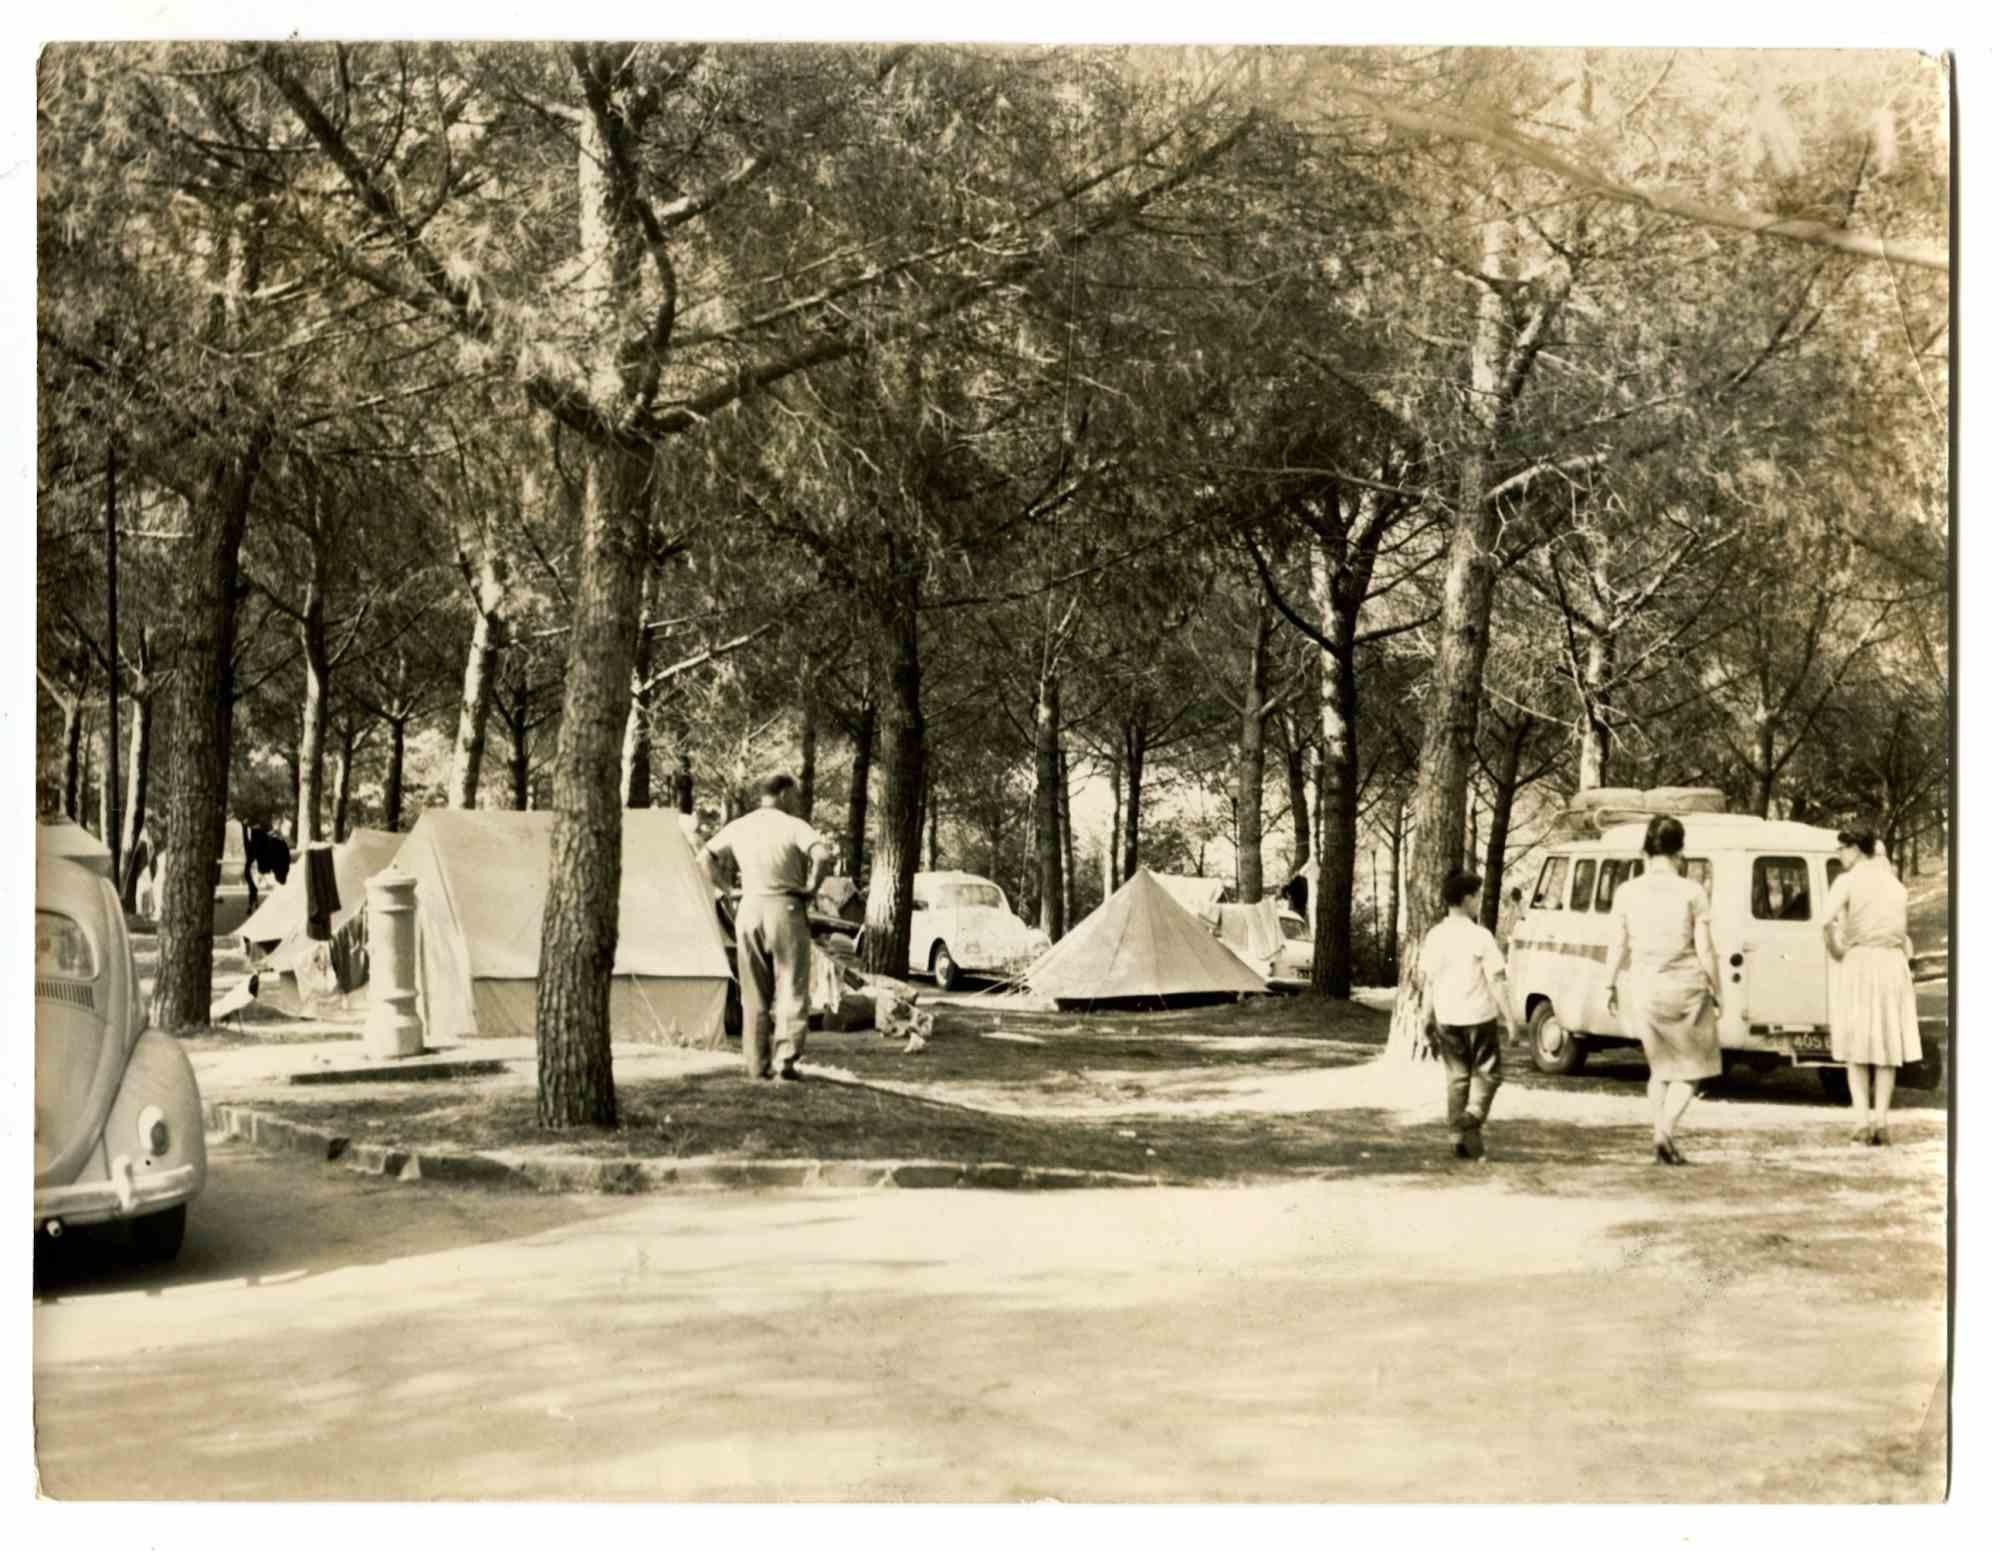 Unknown Portrait Photograph - Old Days - Camping - Vintage Photo - mid-20th Century